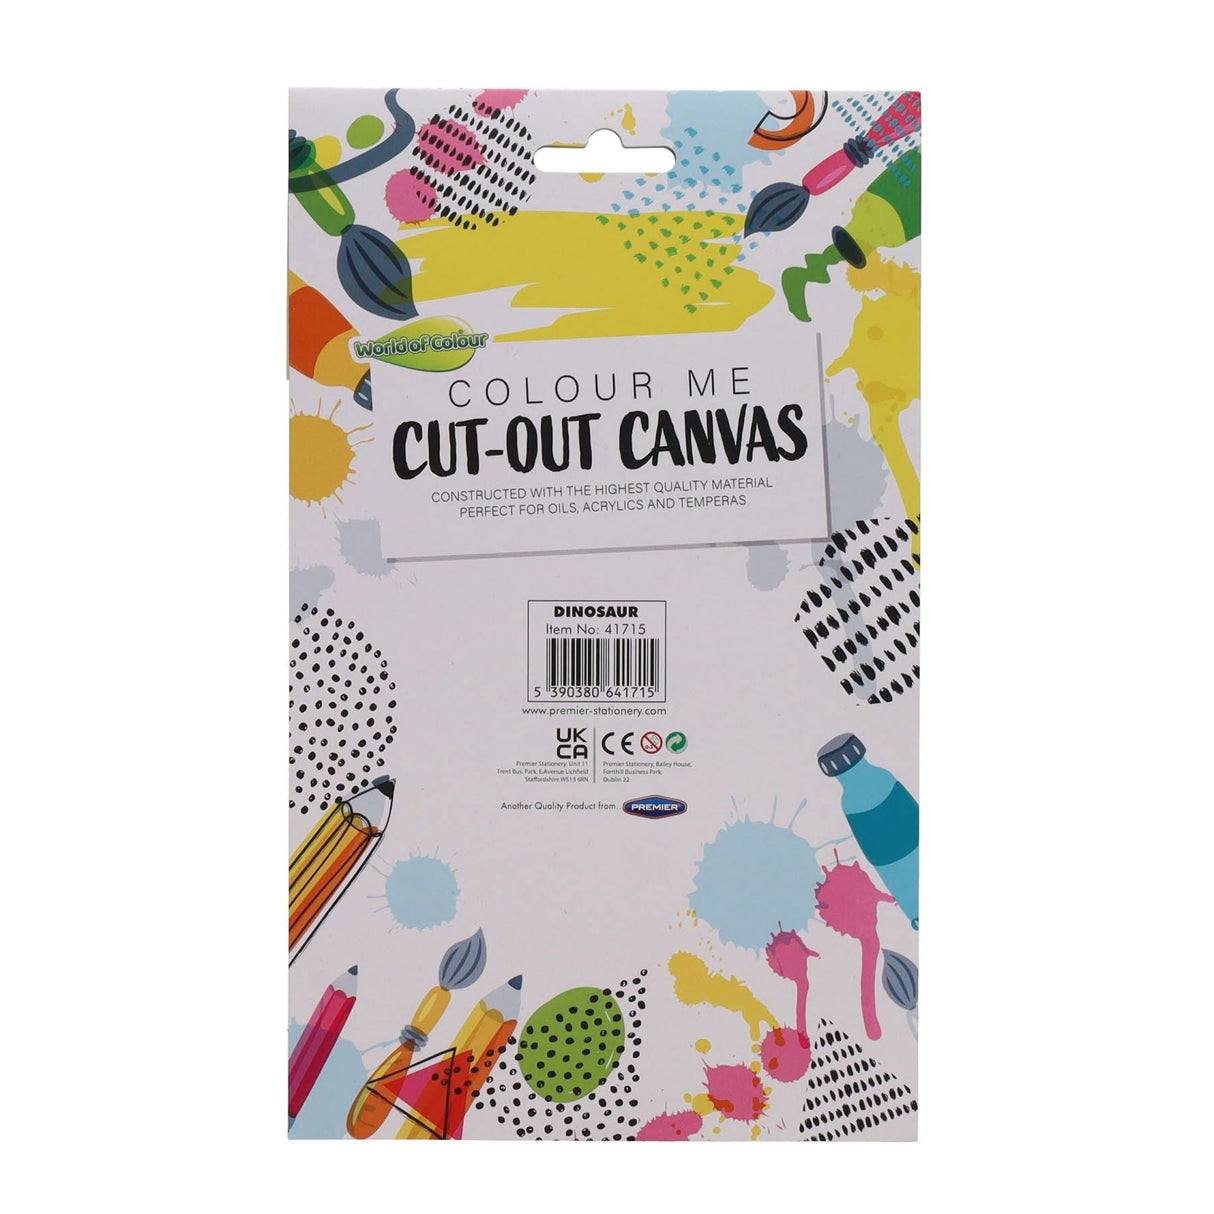 World of Colour Cut Out Canvas - Dinosaur | Stationery Shop UK